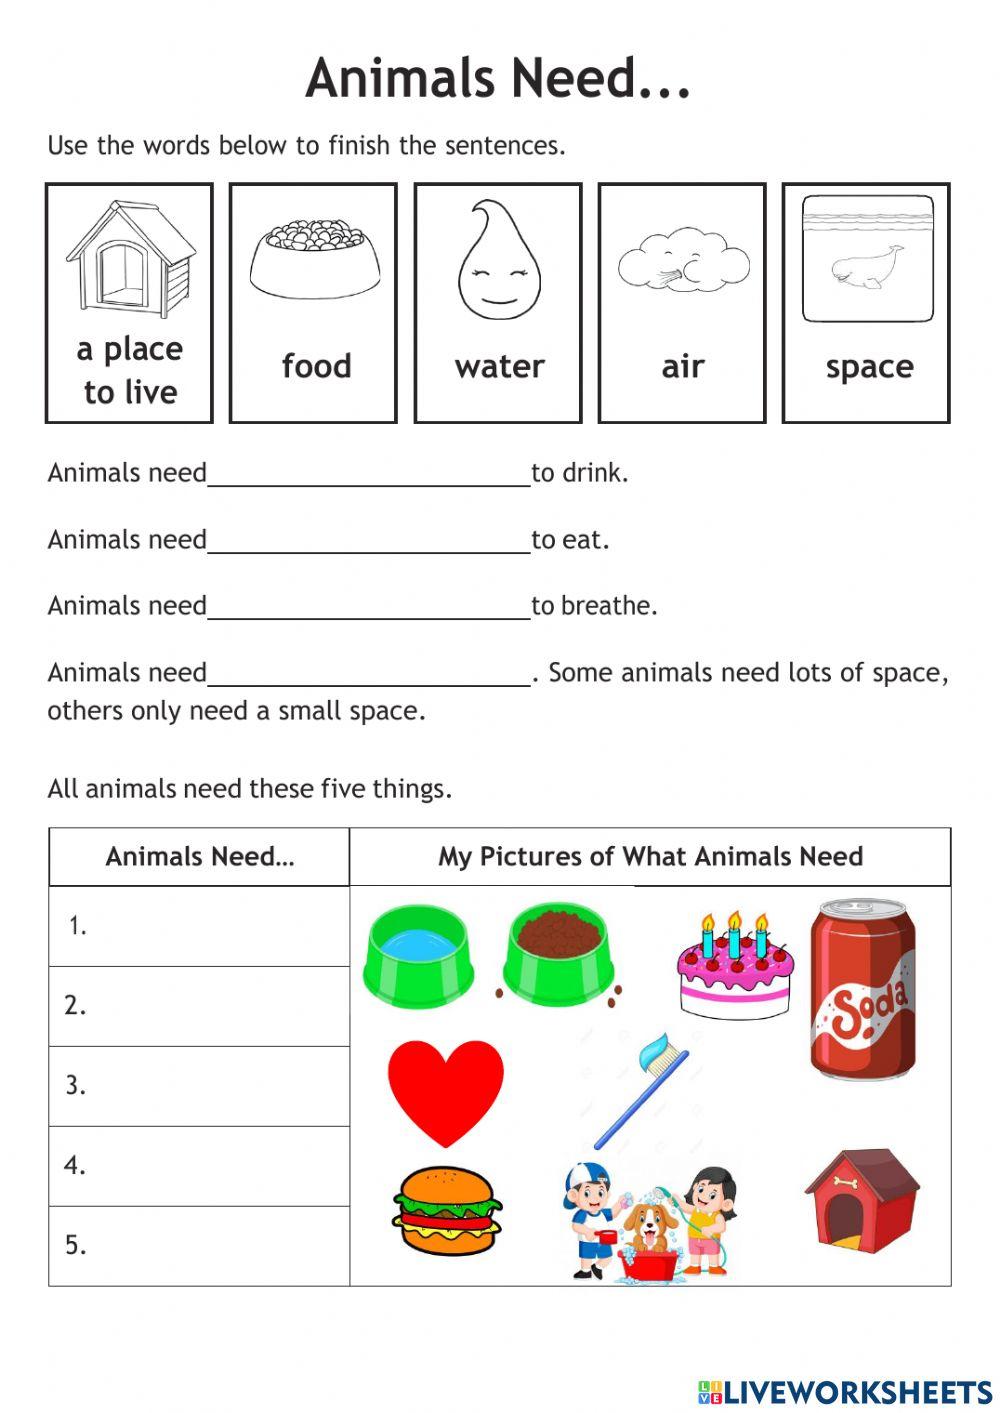 Pets and their needs worksheet | Live Worksheets